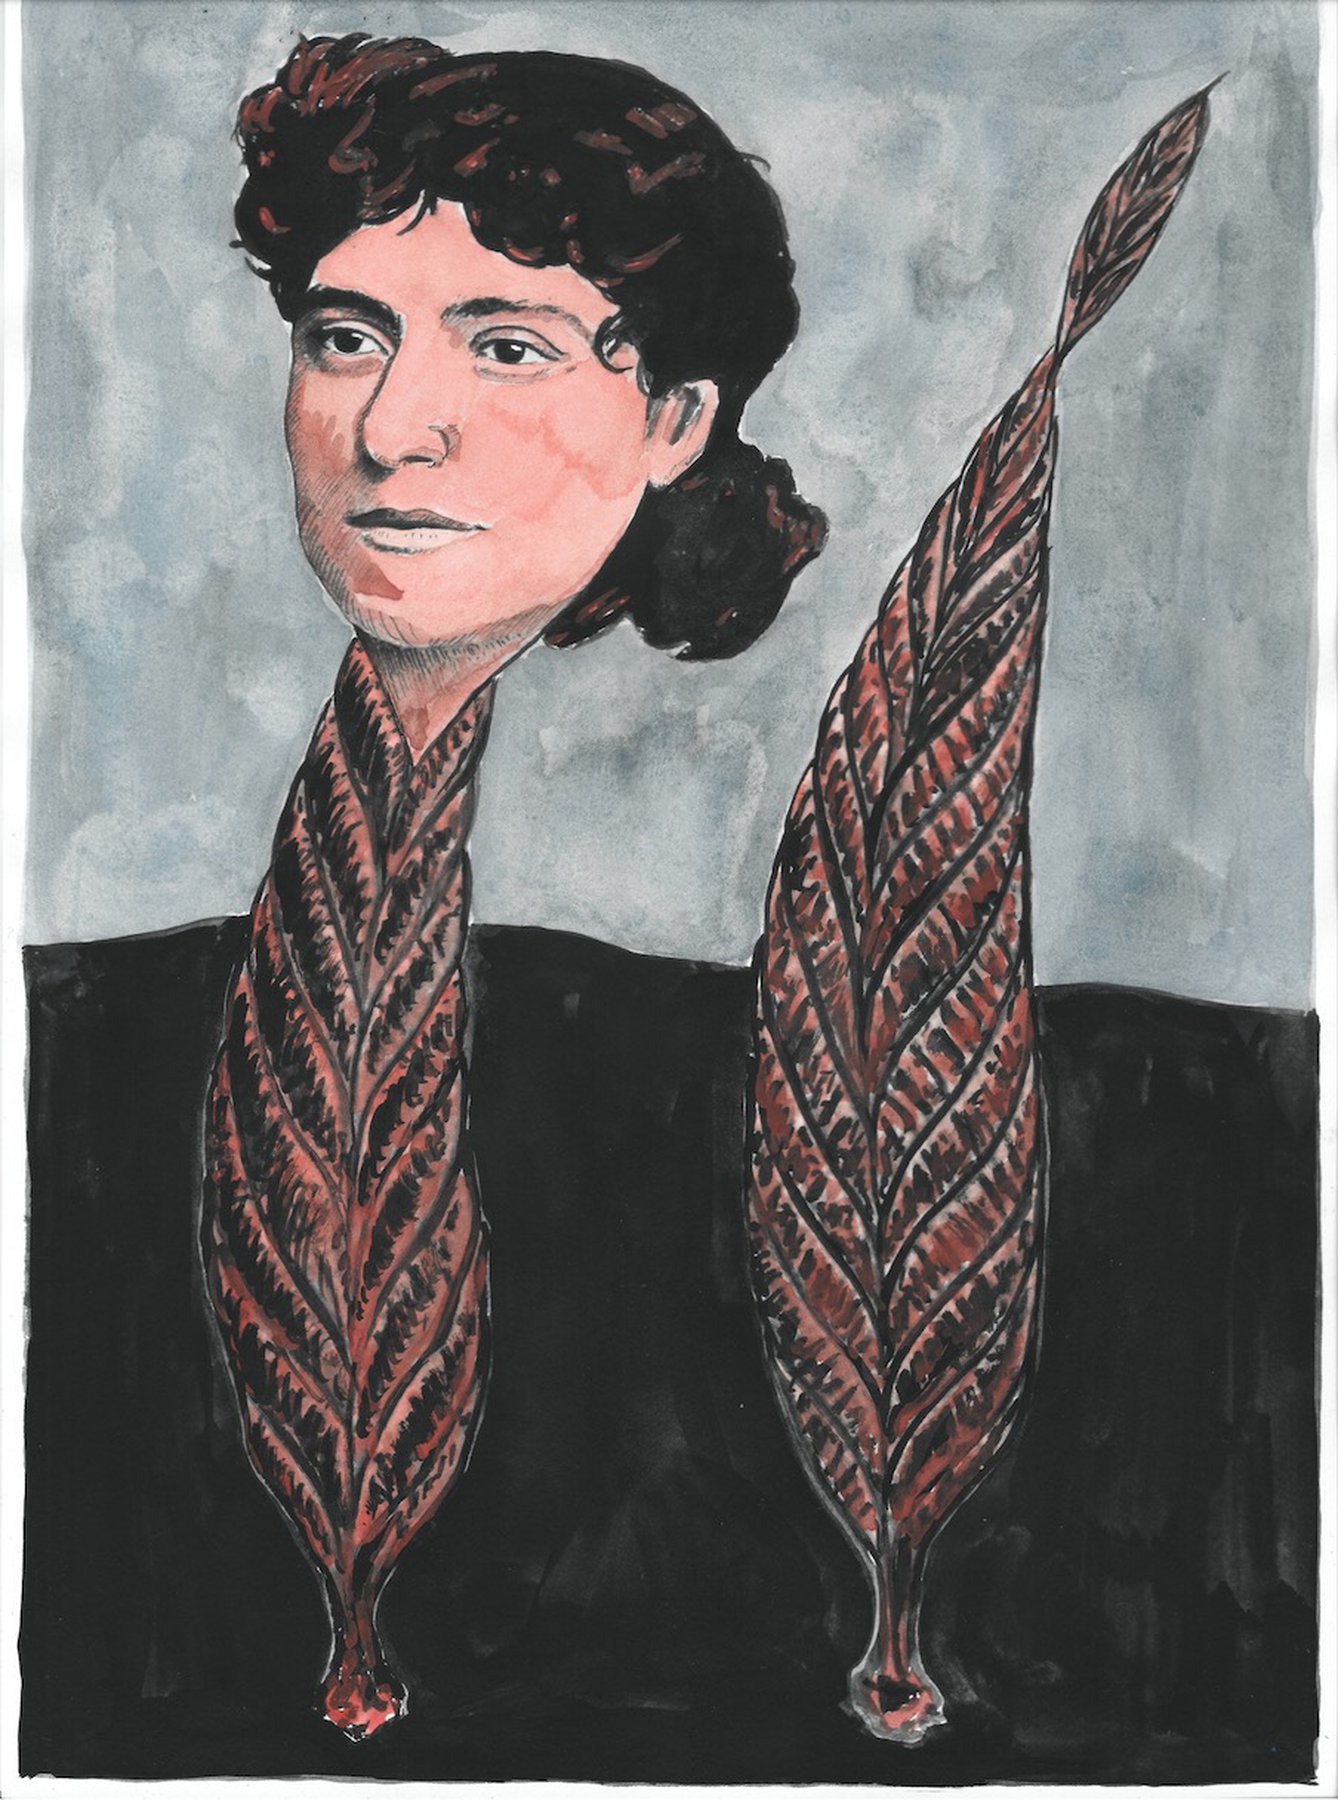 94 Million Years of Collectivism Eleanor Marx (1855-1898) with Charnia